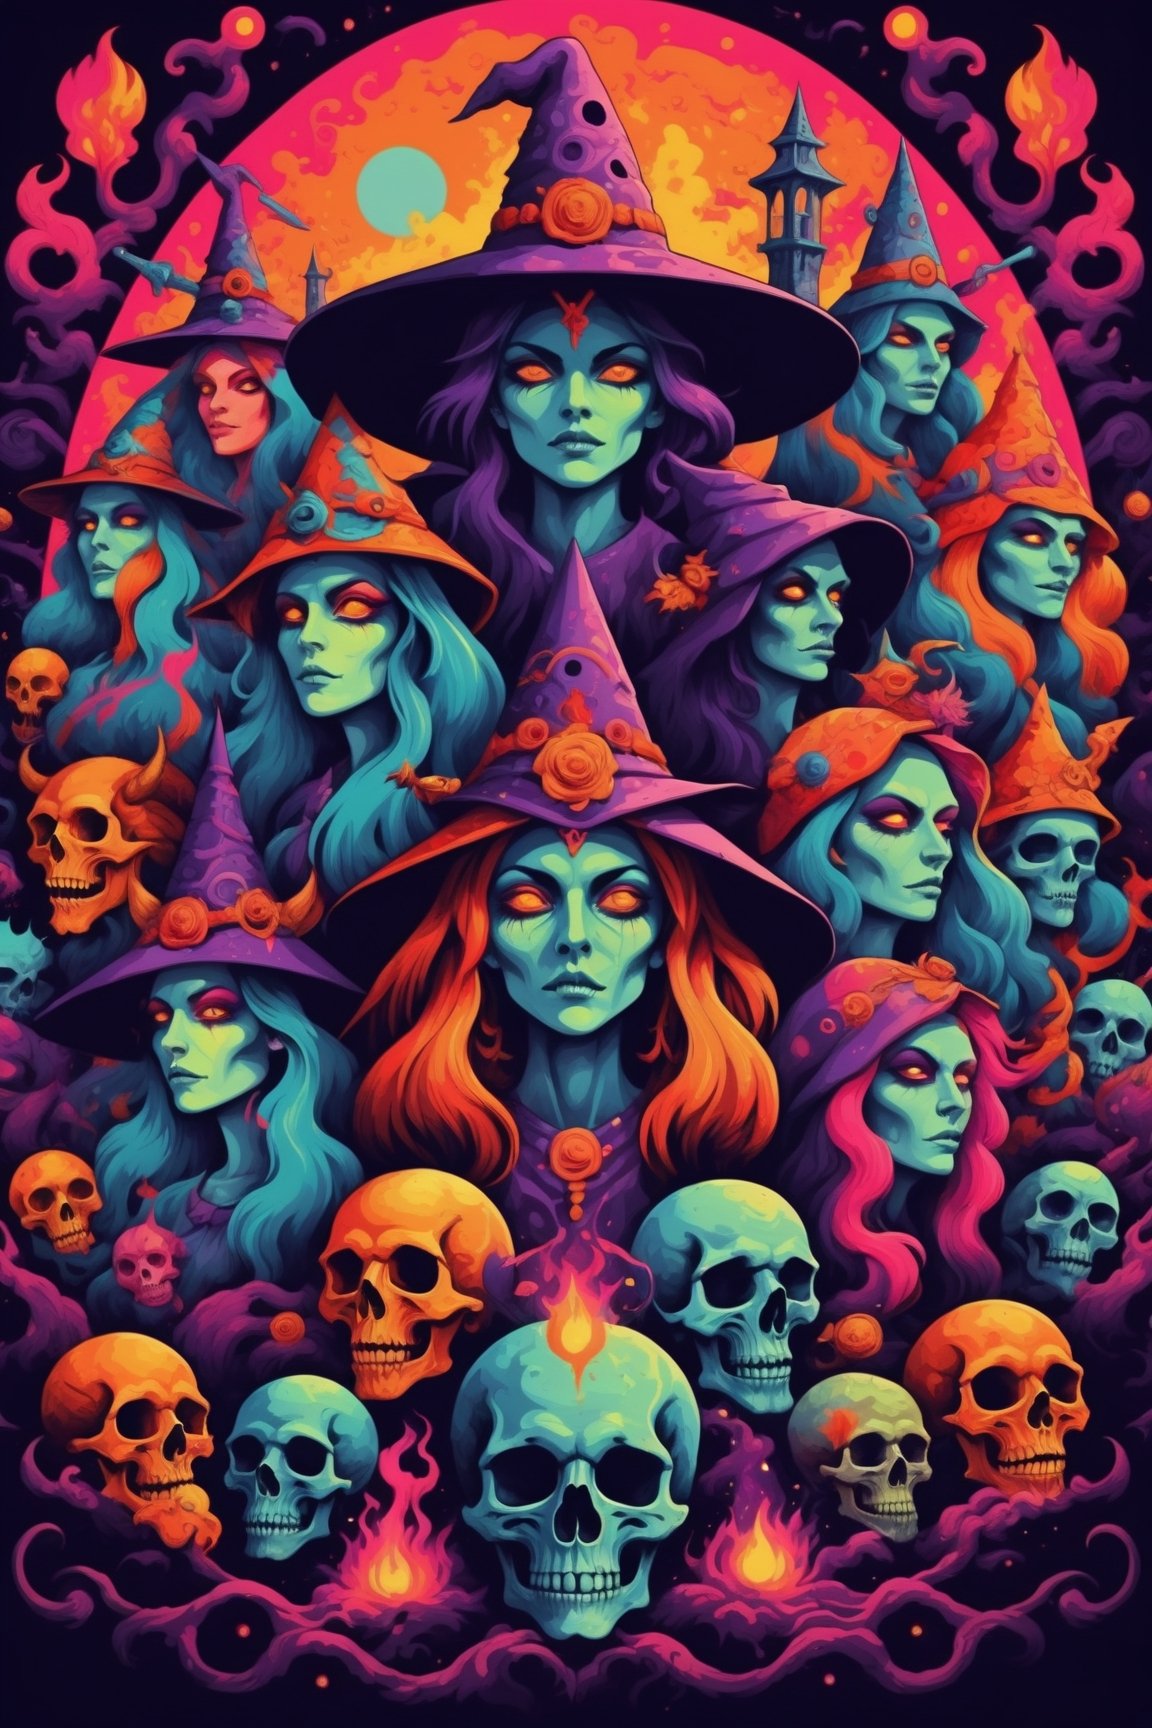 Psychedelic rock design, Witches, skulls, Demons, Medieval age, evil spirits, Sexy, high contrast color palette. 